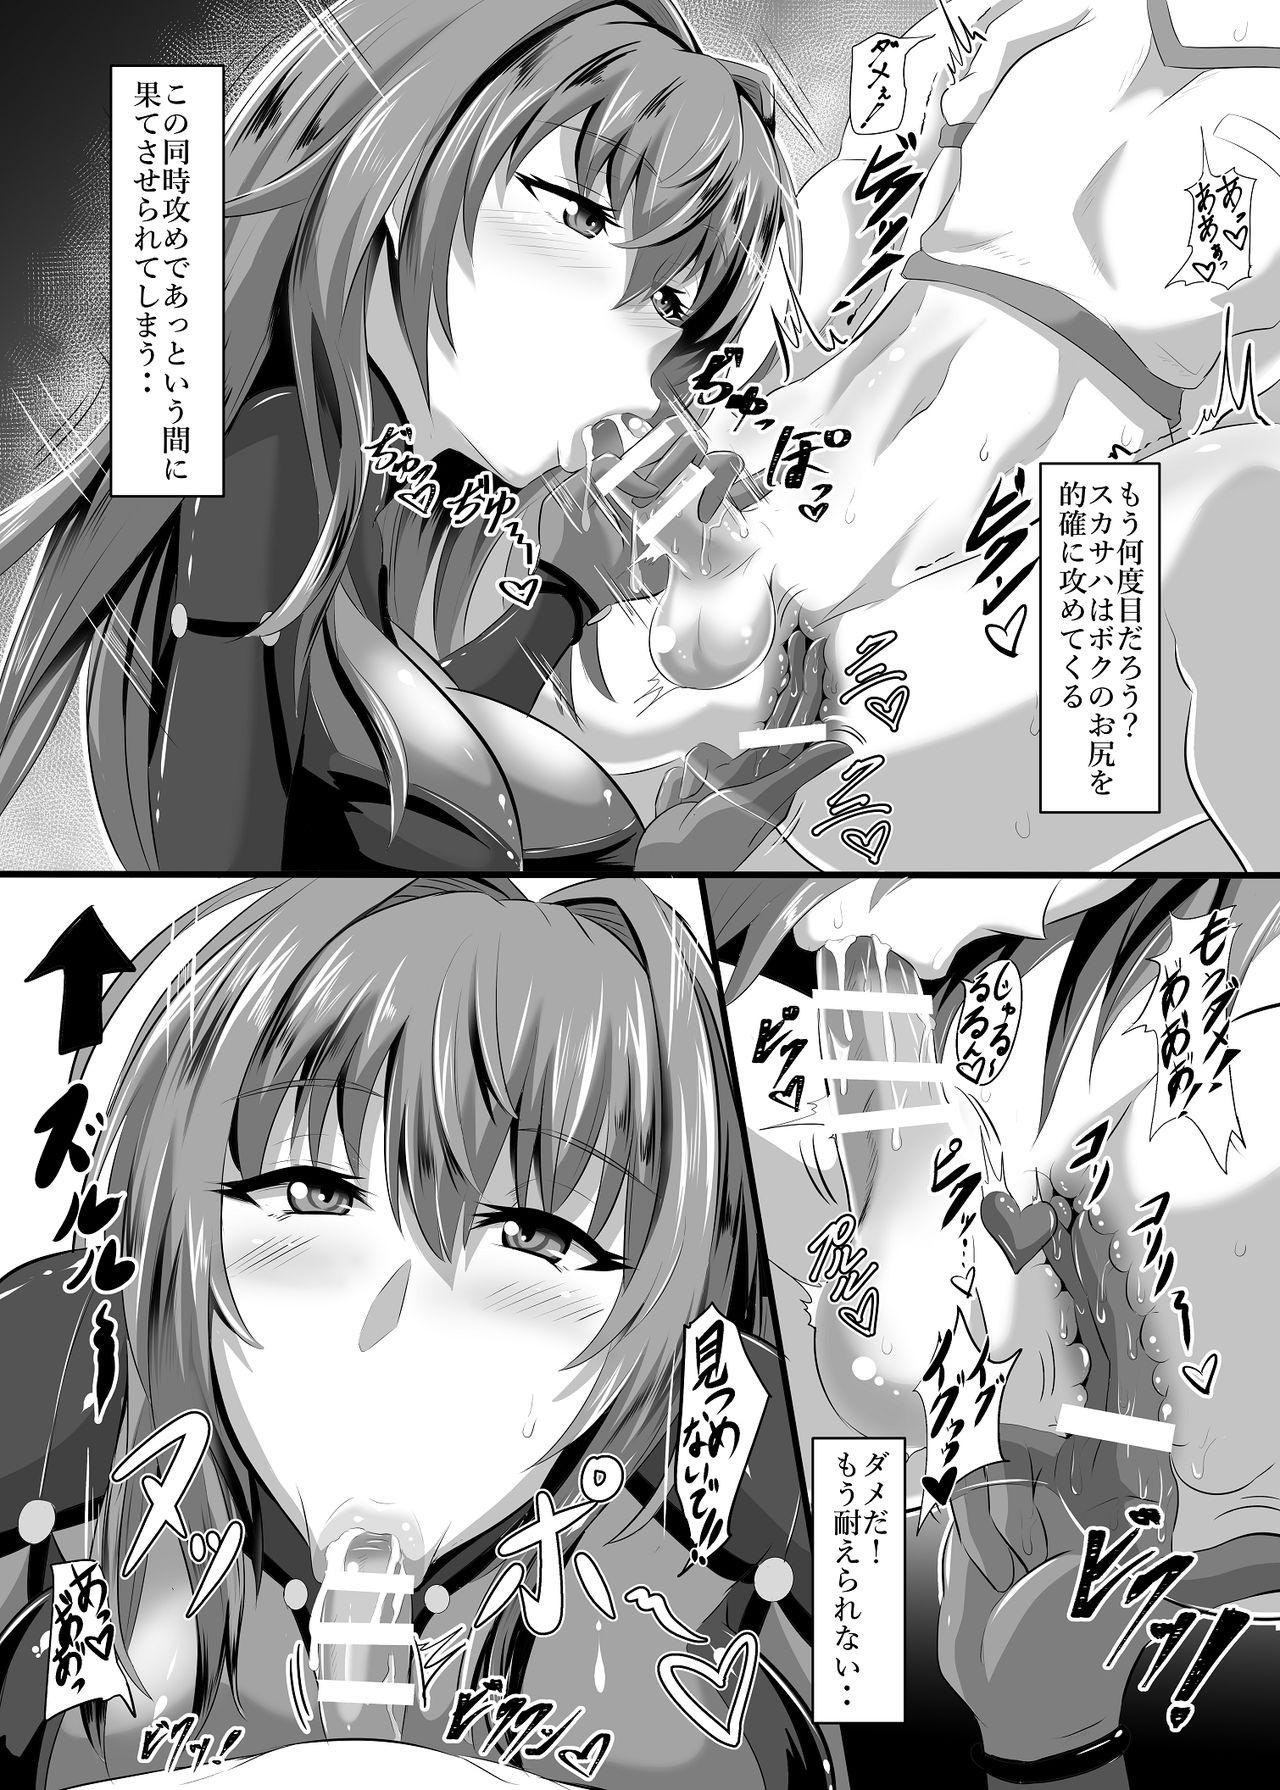 Classic Gehenna 5 - Fate grand order Fleshlight - Page 6